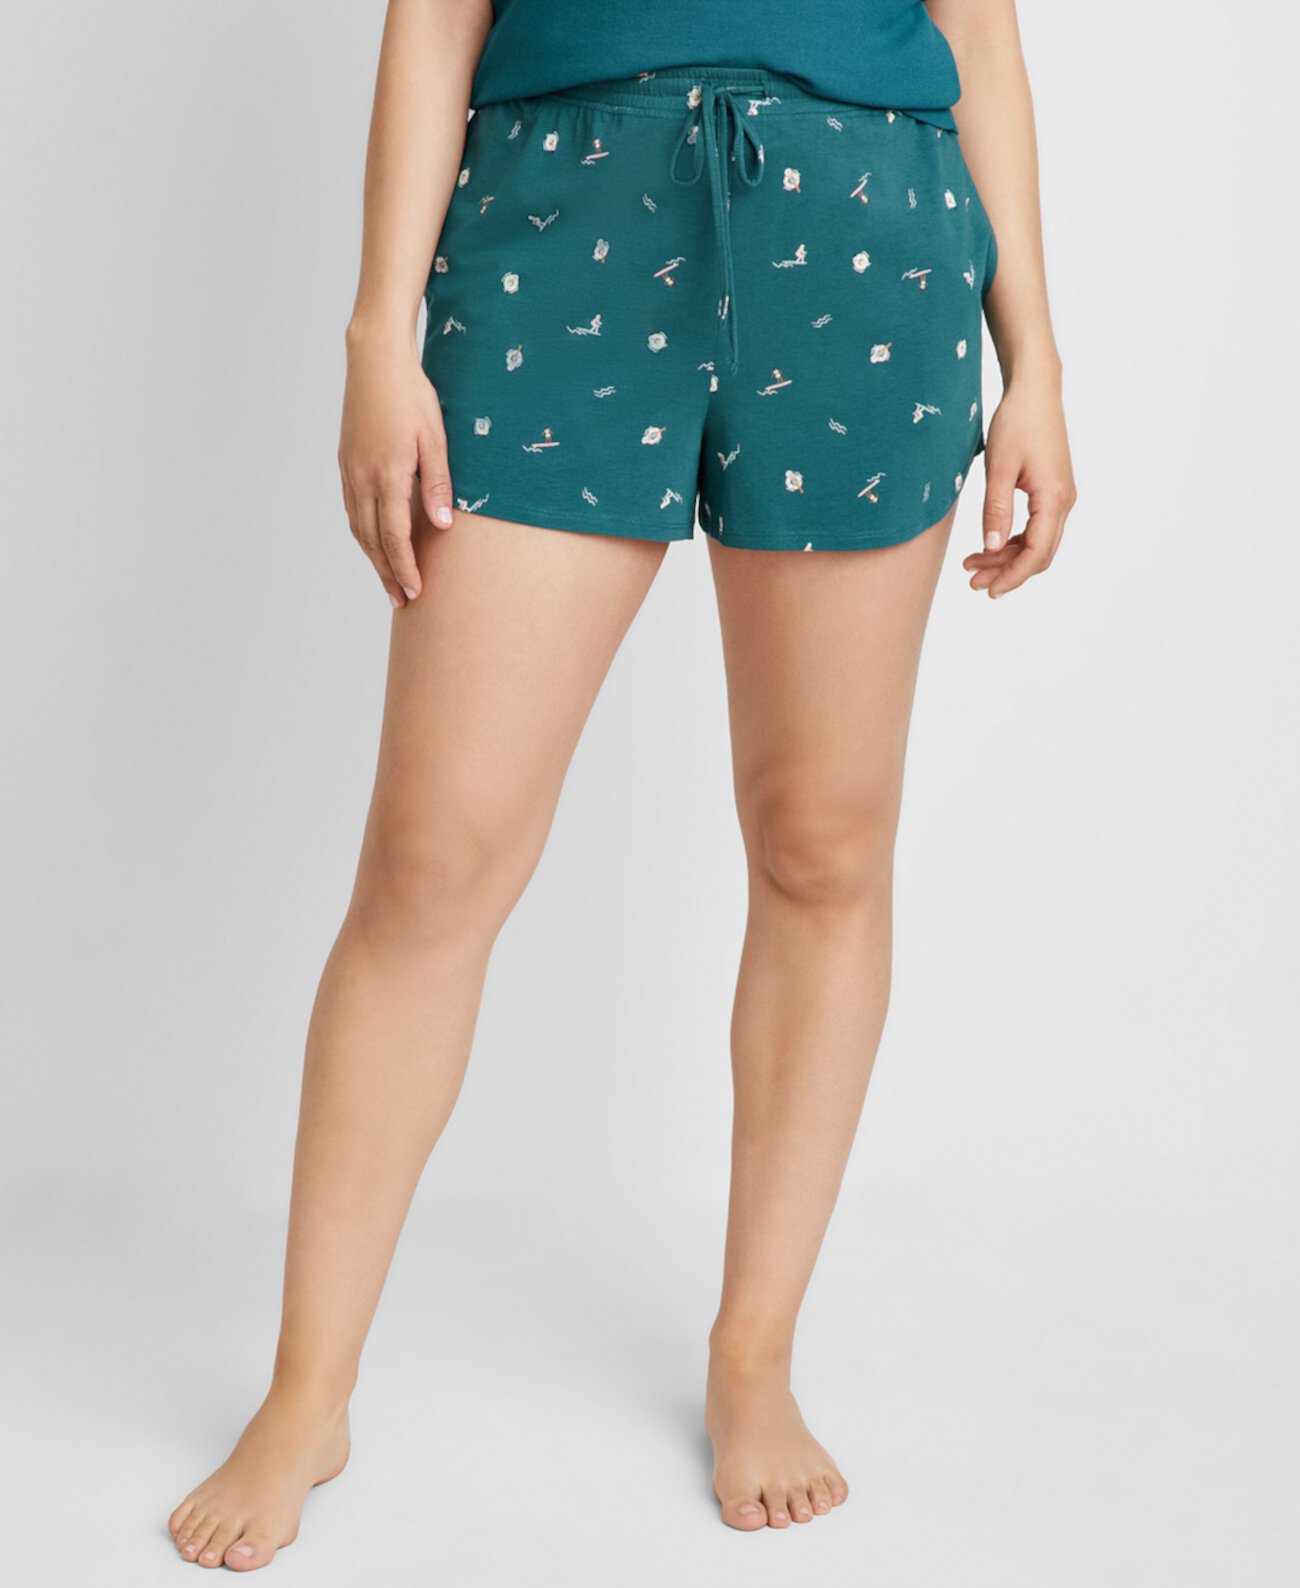 Women's Printed Knit Sleep Shorts XS-3X, Created for Macy's State of Day